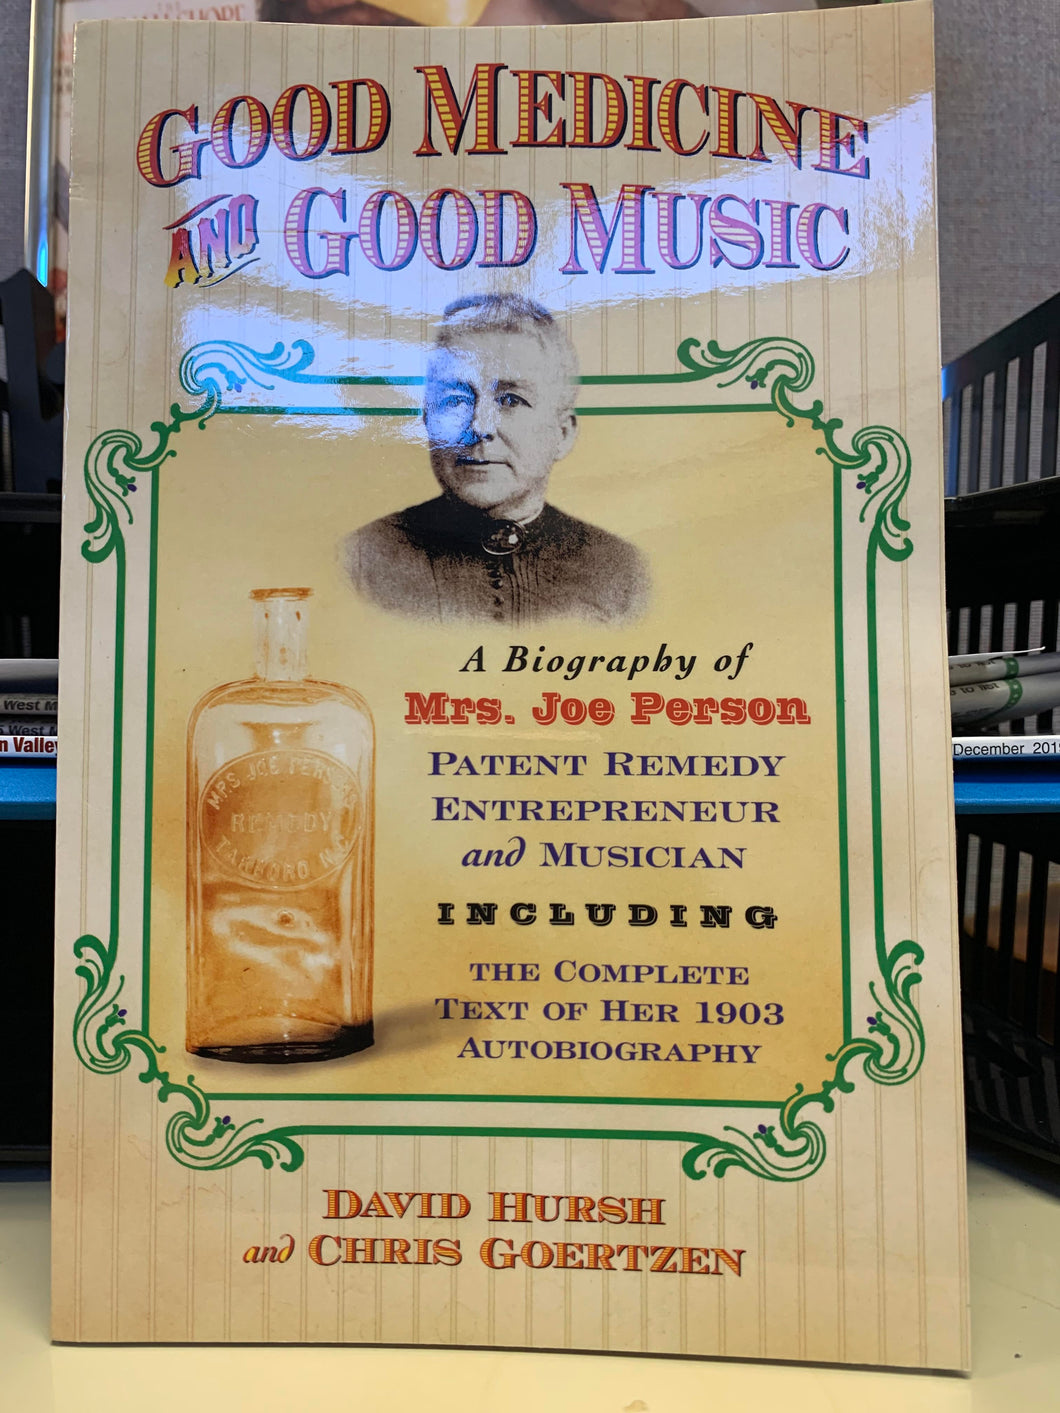 Good Medicine and Good Music: A Biography of Mrs. Joe Person Patent Remedy Entrepreneur and Musician by David Hursh and Chris Goertzen